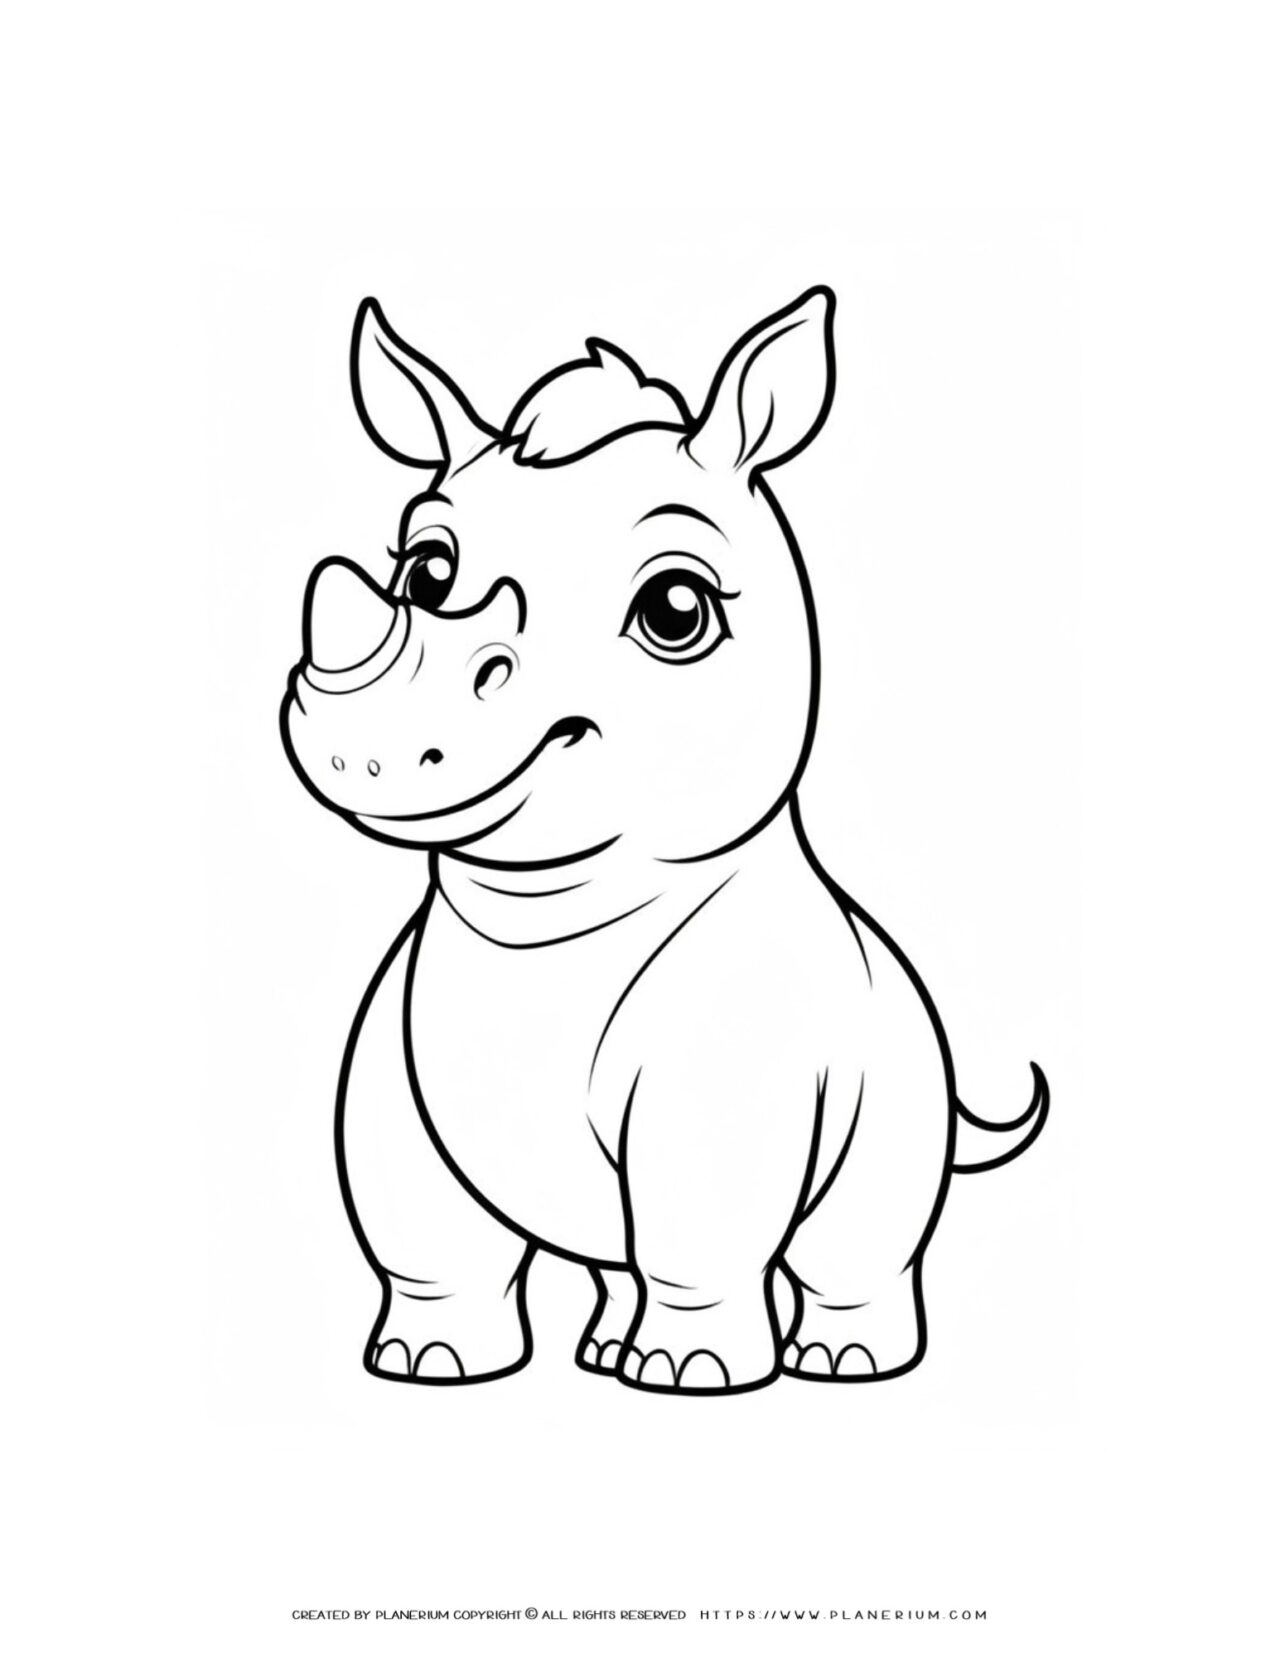 cute-baby-rhinoceros-wild-animal-coloring-page-for-kids